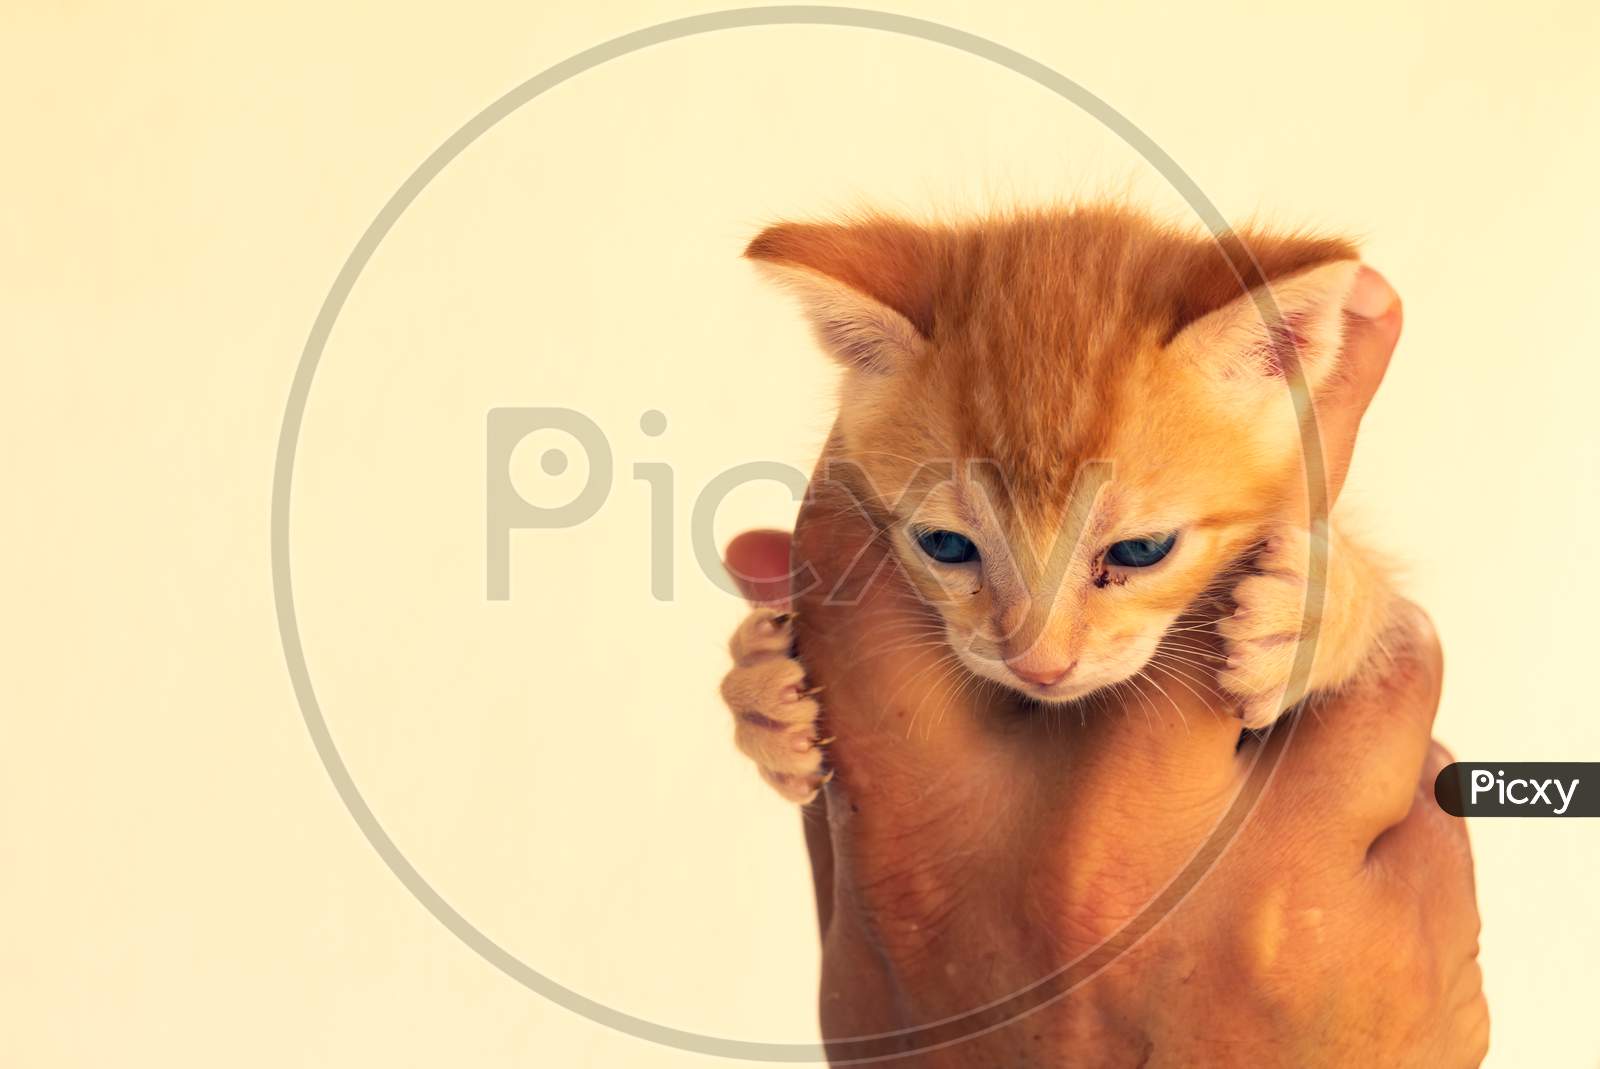 Small Cat Held In The Hands Of A Man. Free Space To Write. Domestic Animal Of Golden Color.